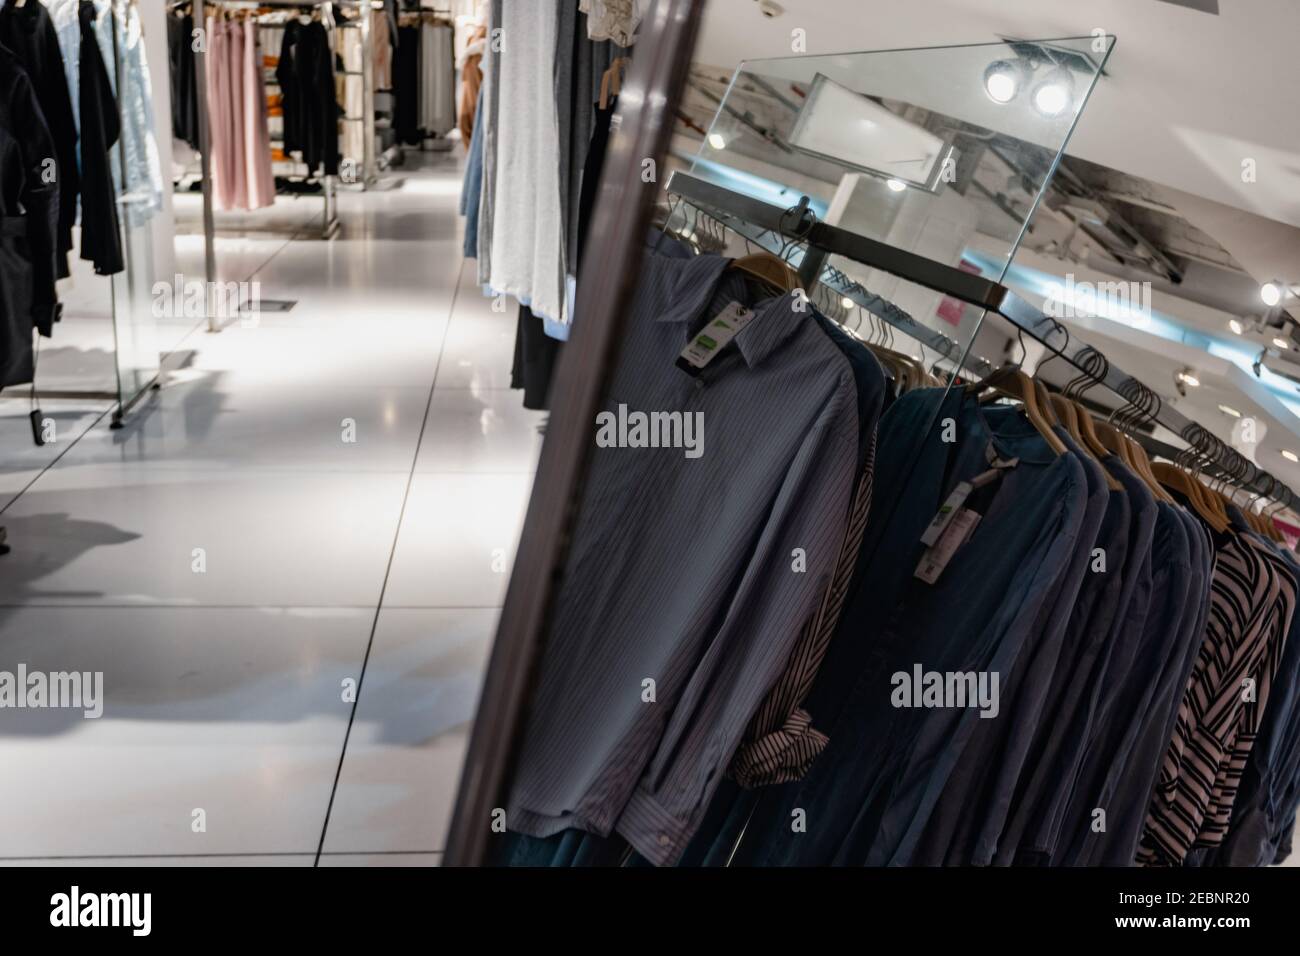 mirror in a large clothing store in the women's section. Falabella Argentina Stock Photo